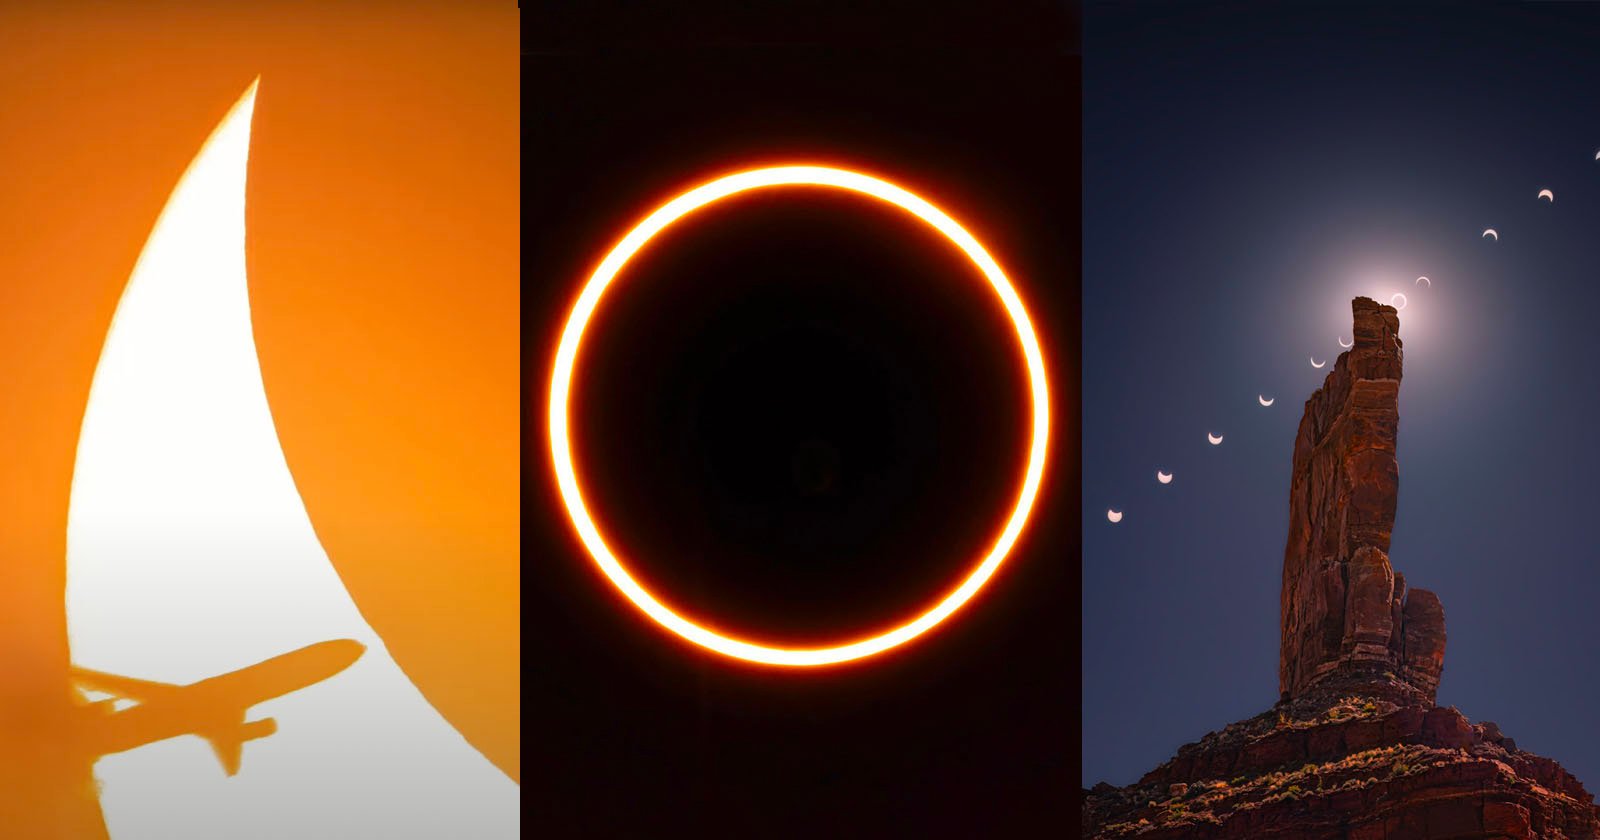 Photographers Capture Spectacular Ring of Fire Eclipse